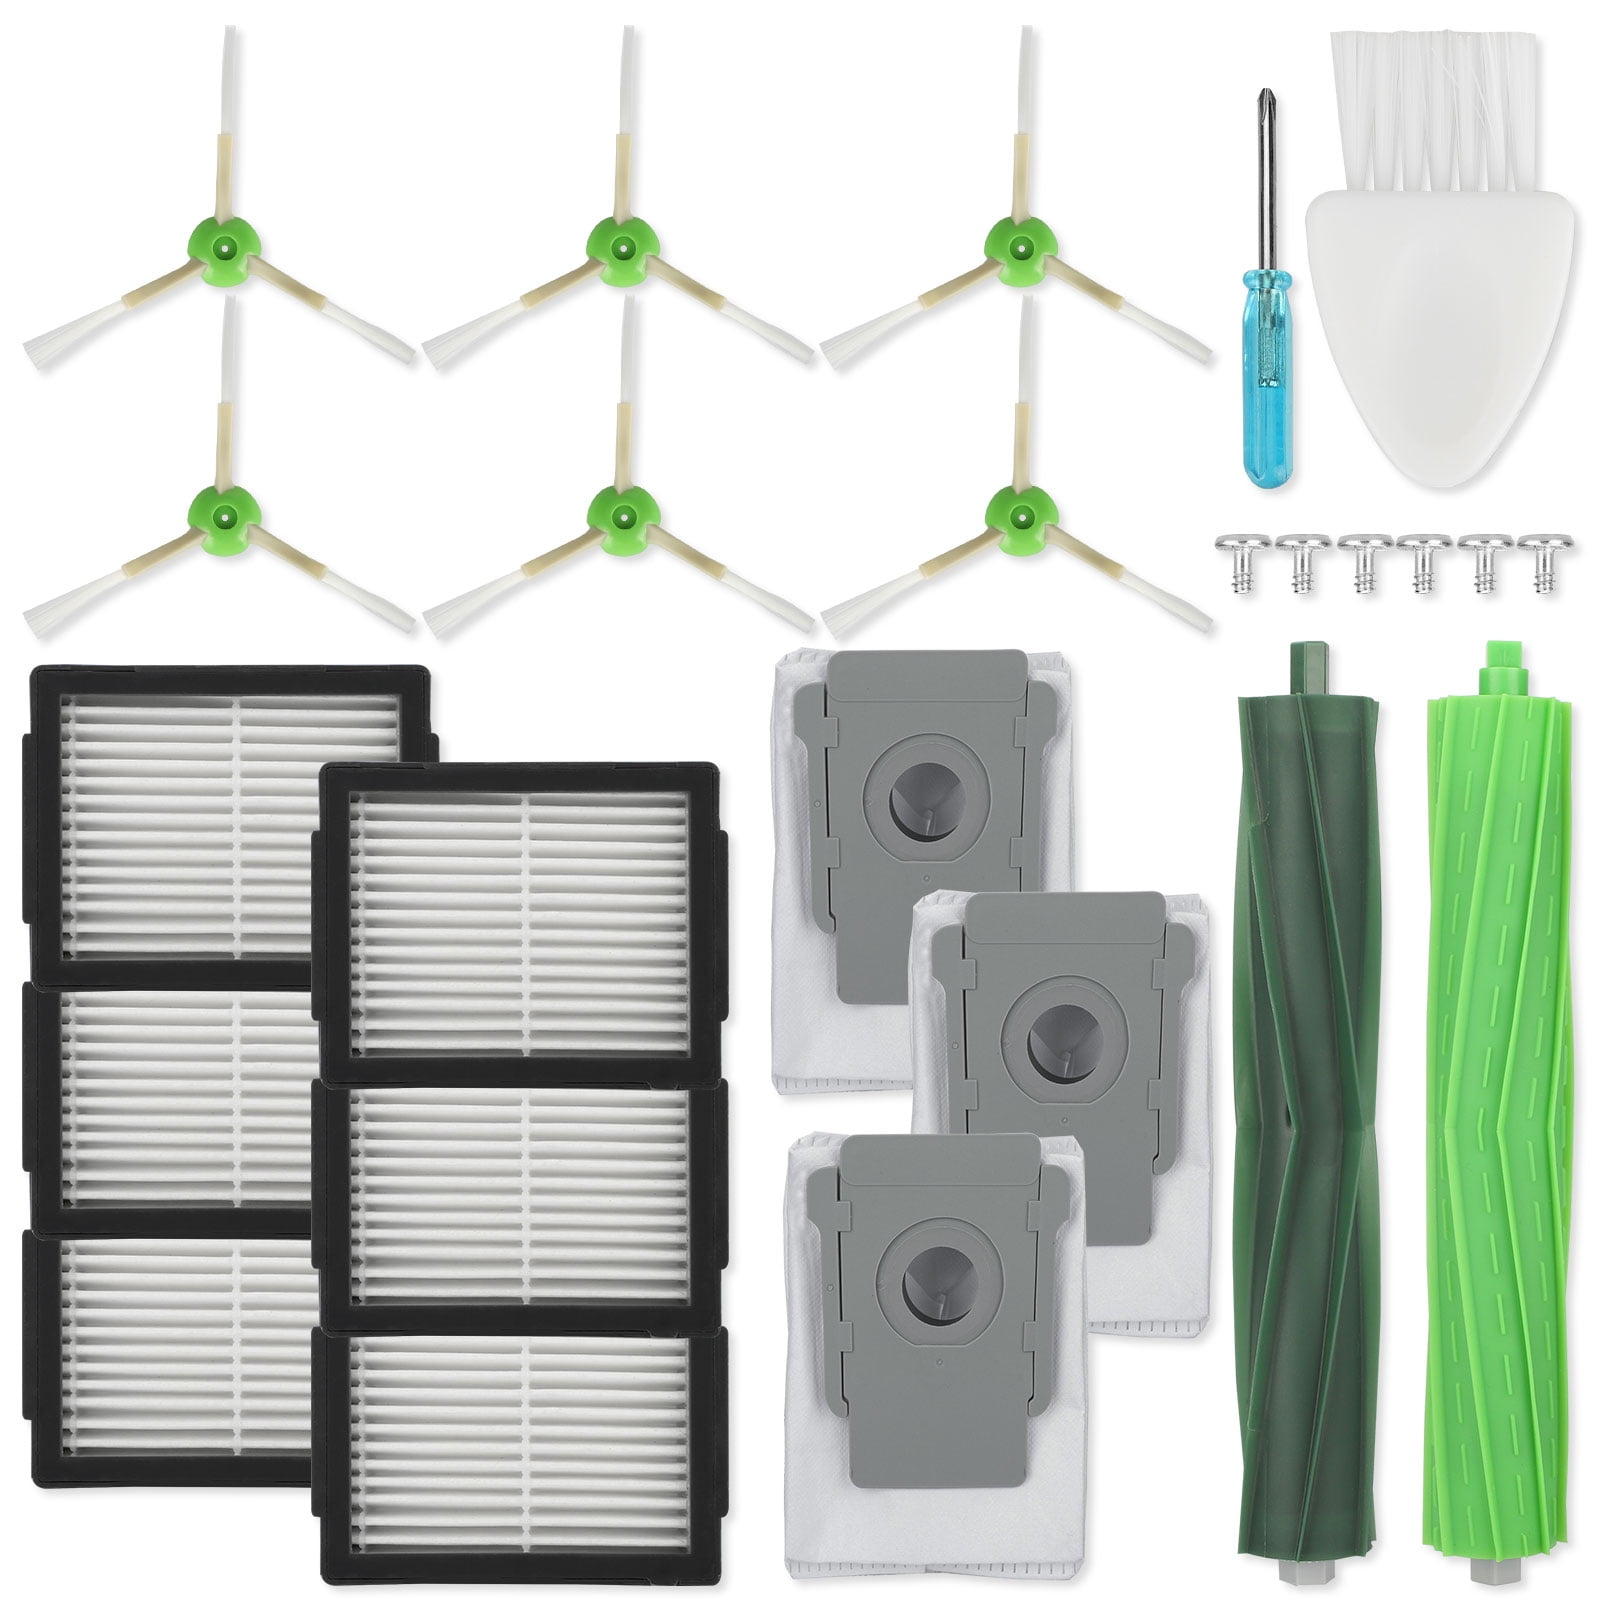 Different Cleaner Accessory Kits for iRobot Roomba i7 i7+/i7 Plus E5 E6 Vaccumsl 